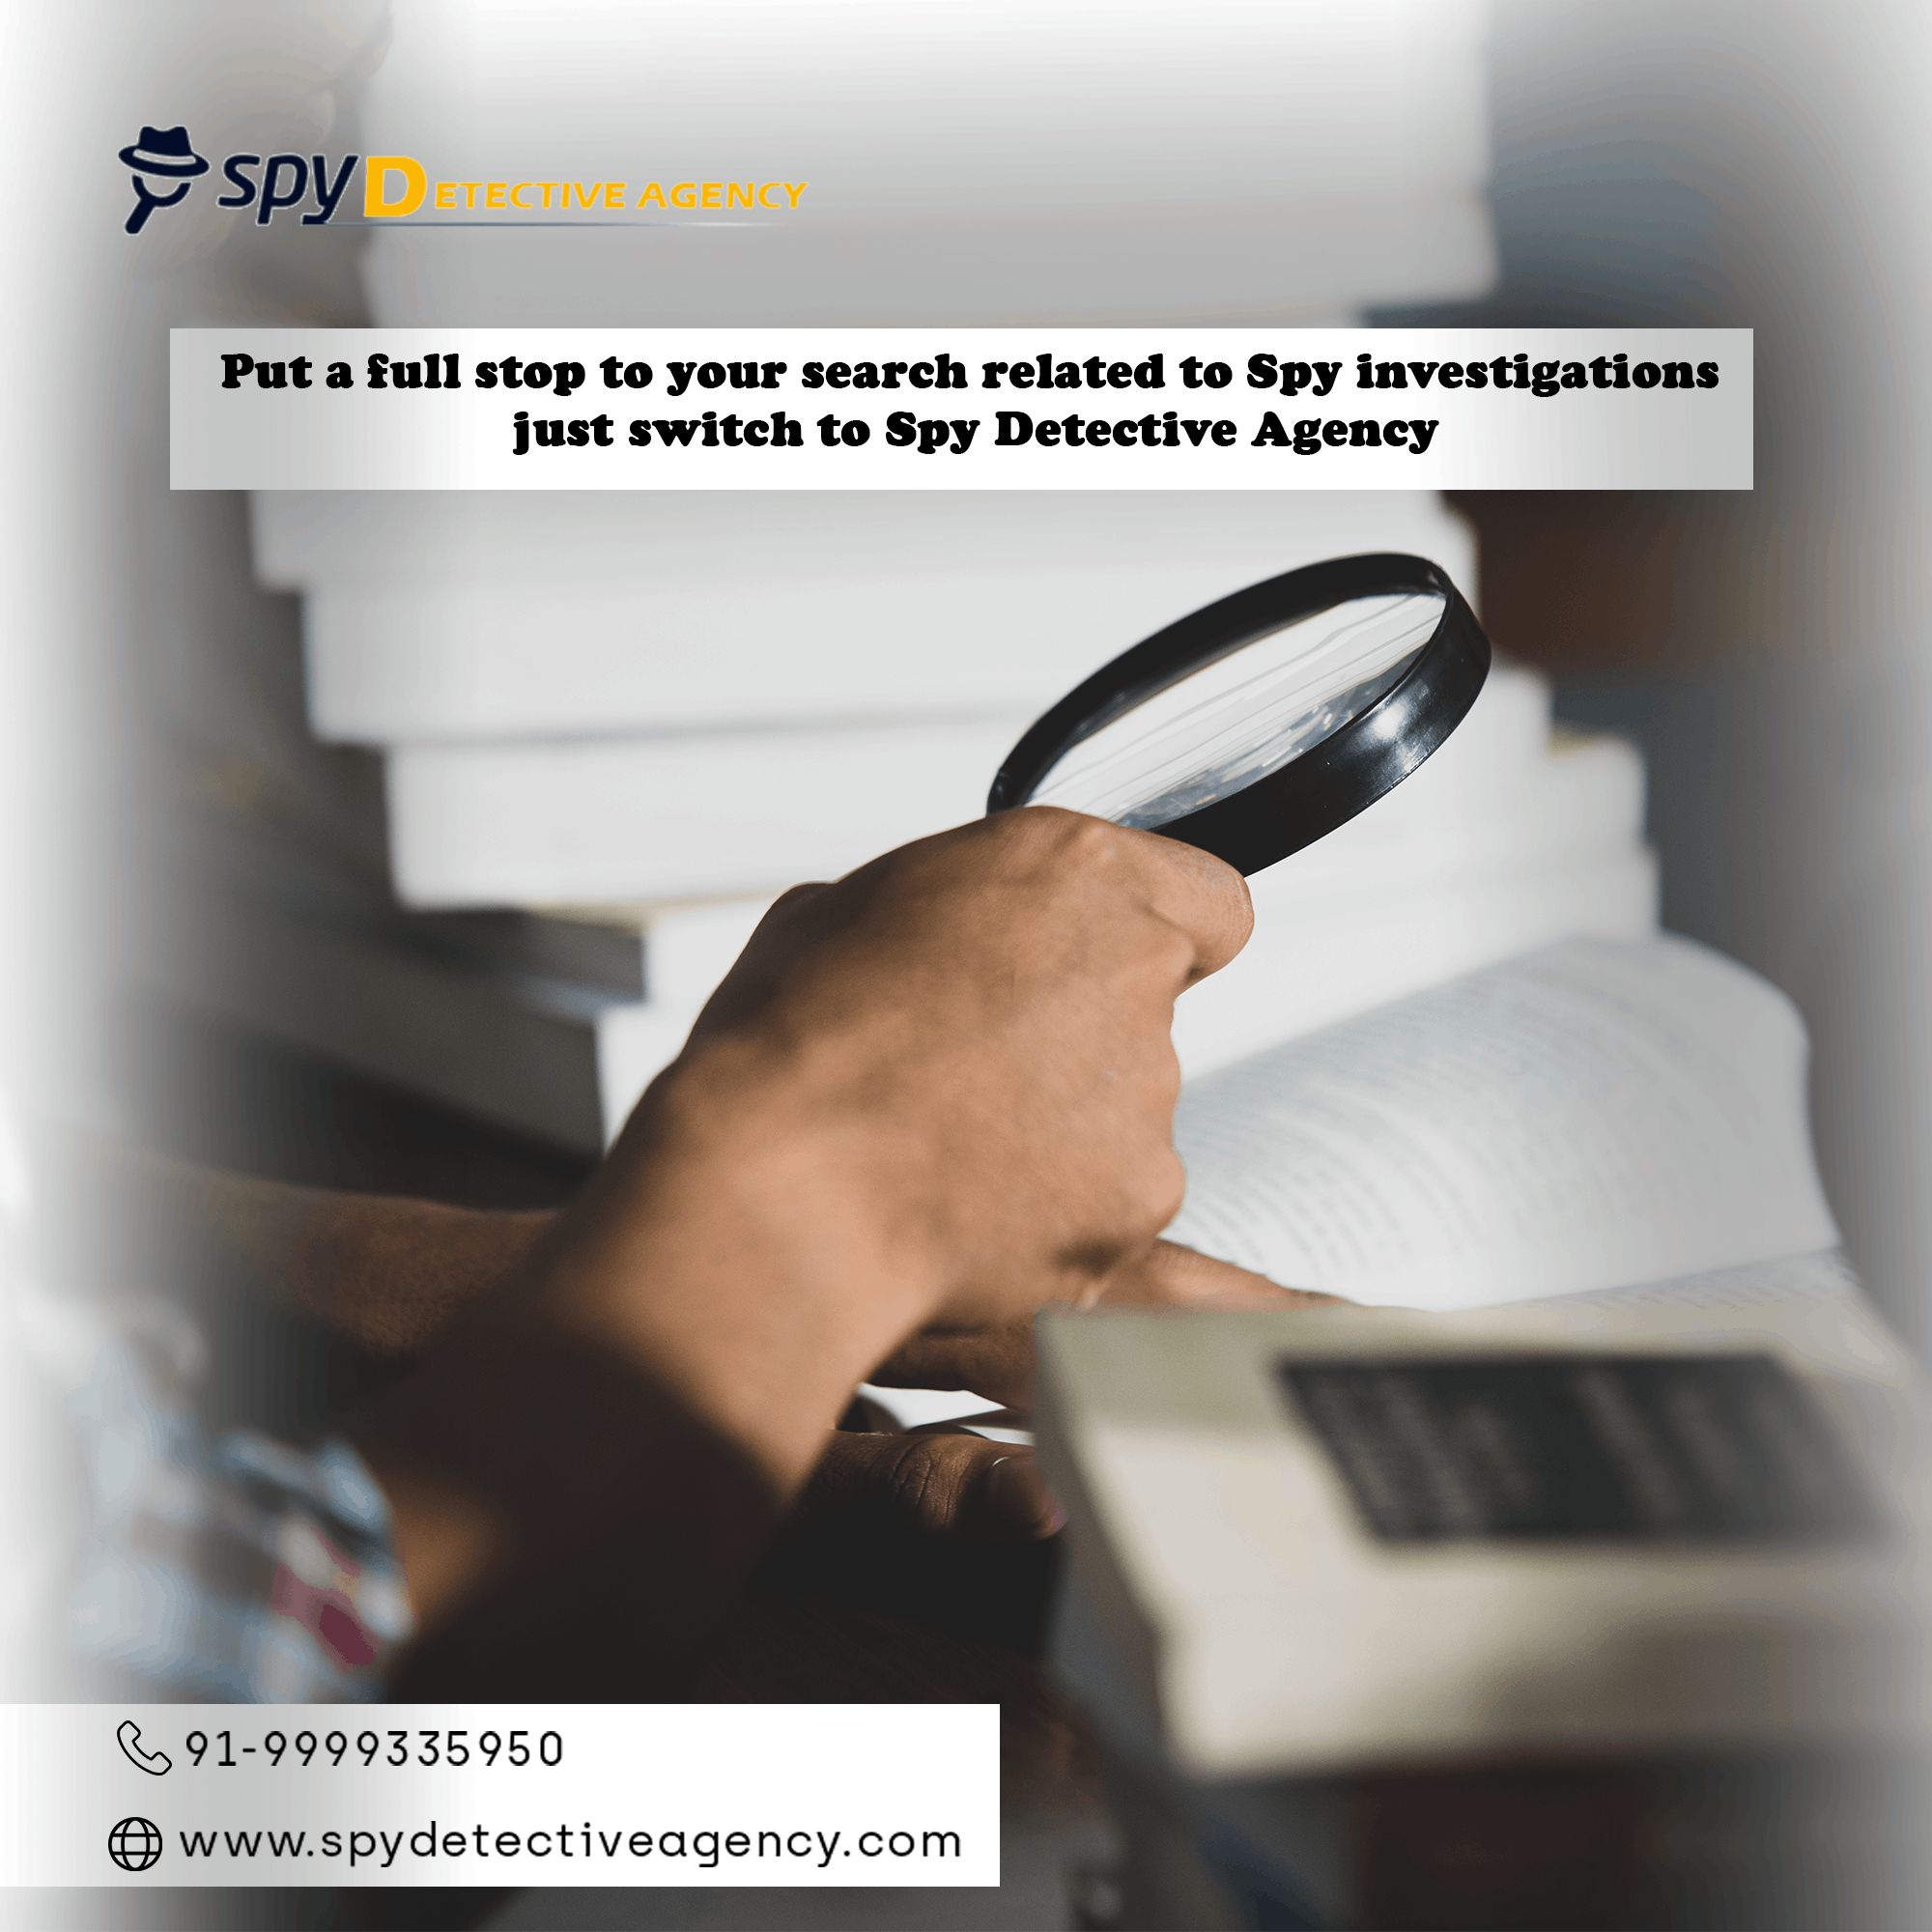 Spy Detective Service in Bangalore to Help You Find Potential Threats